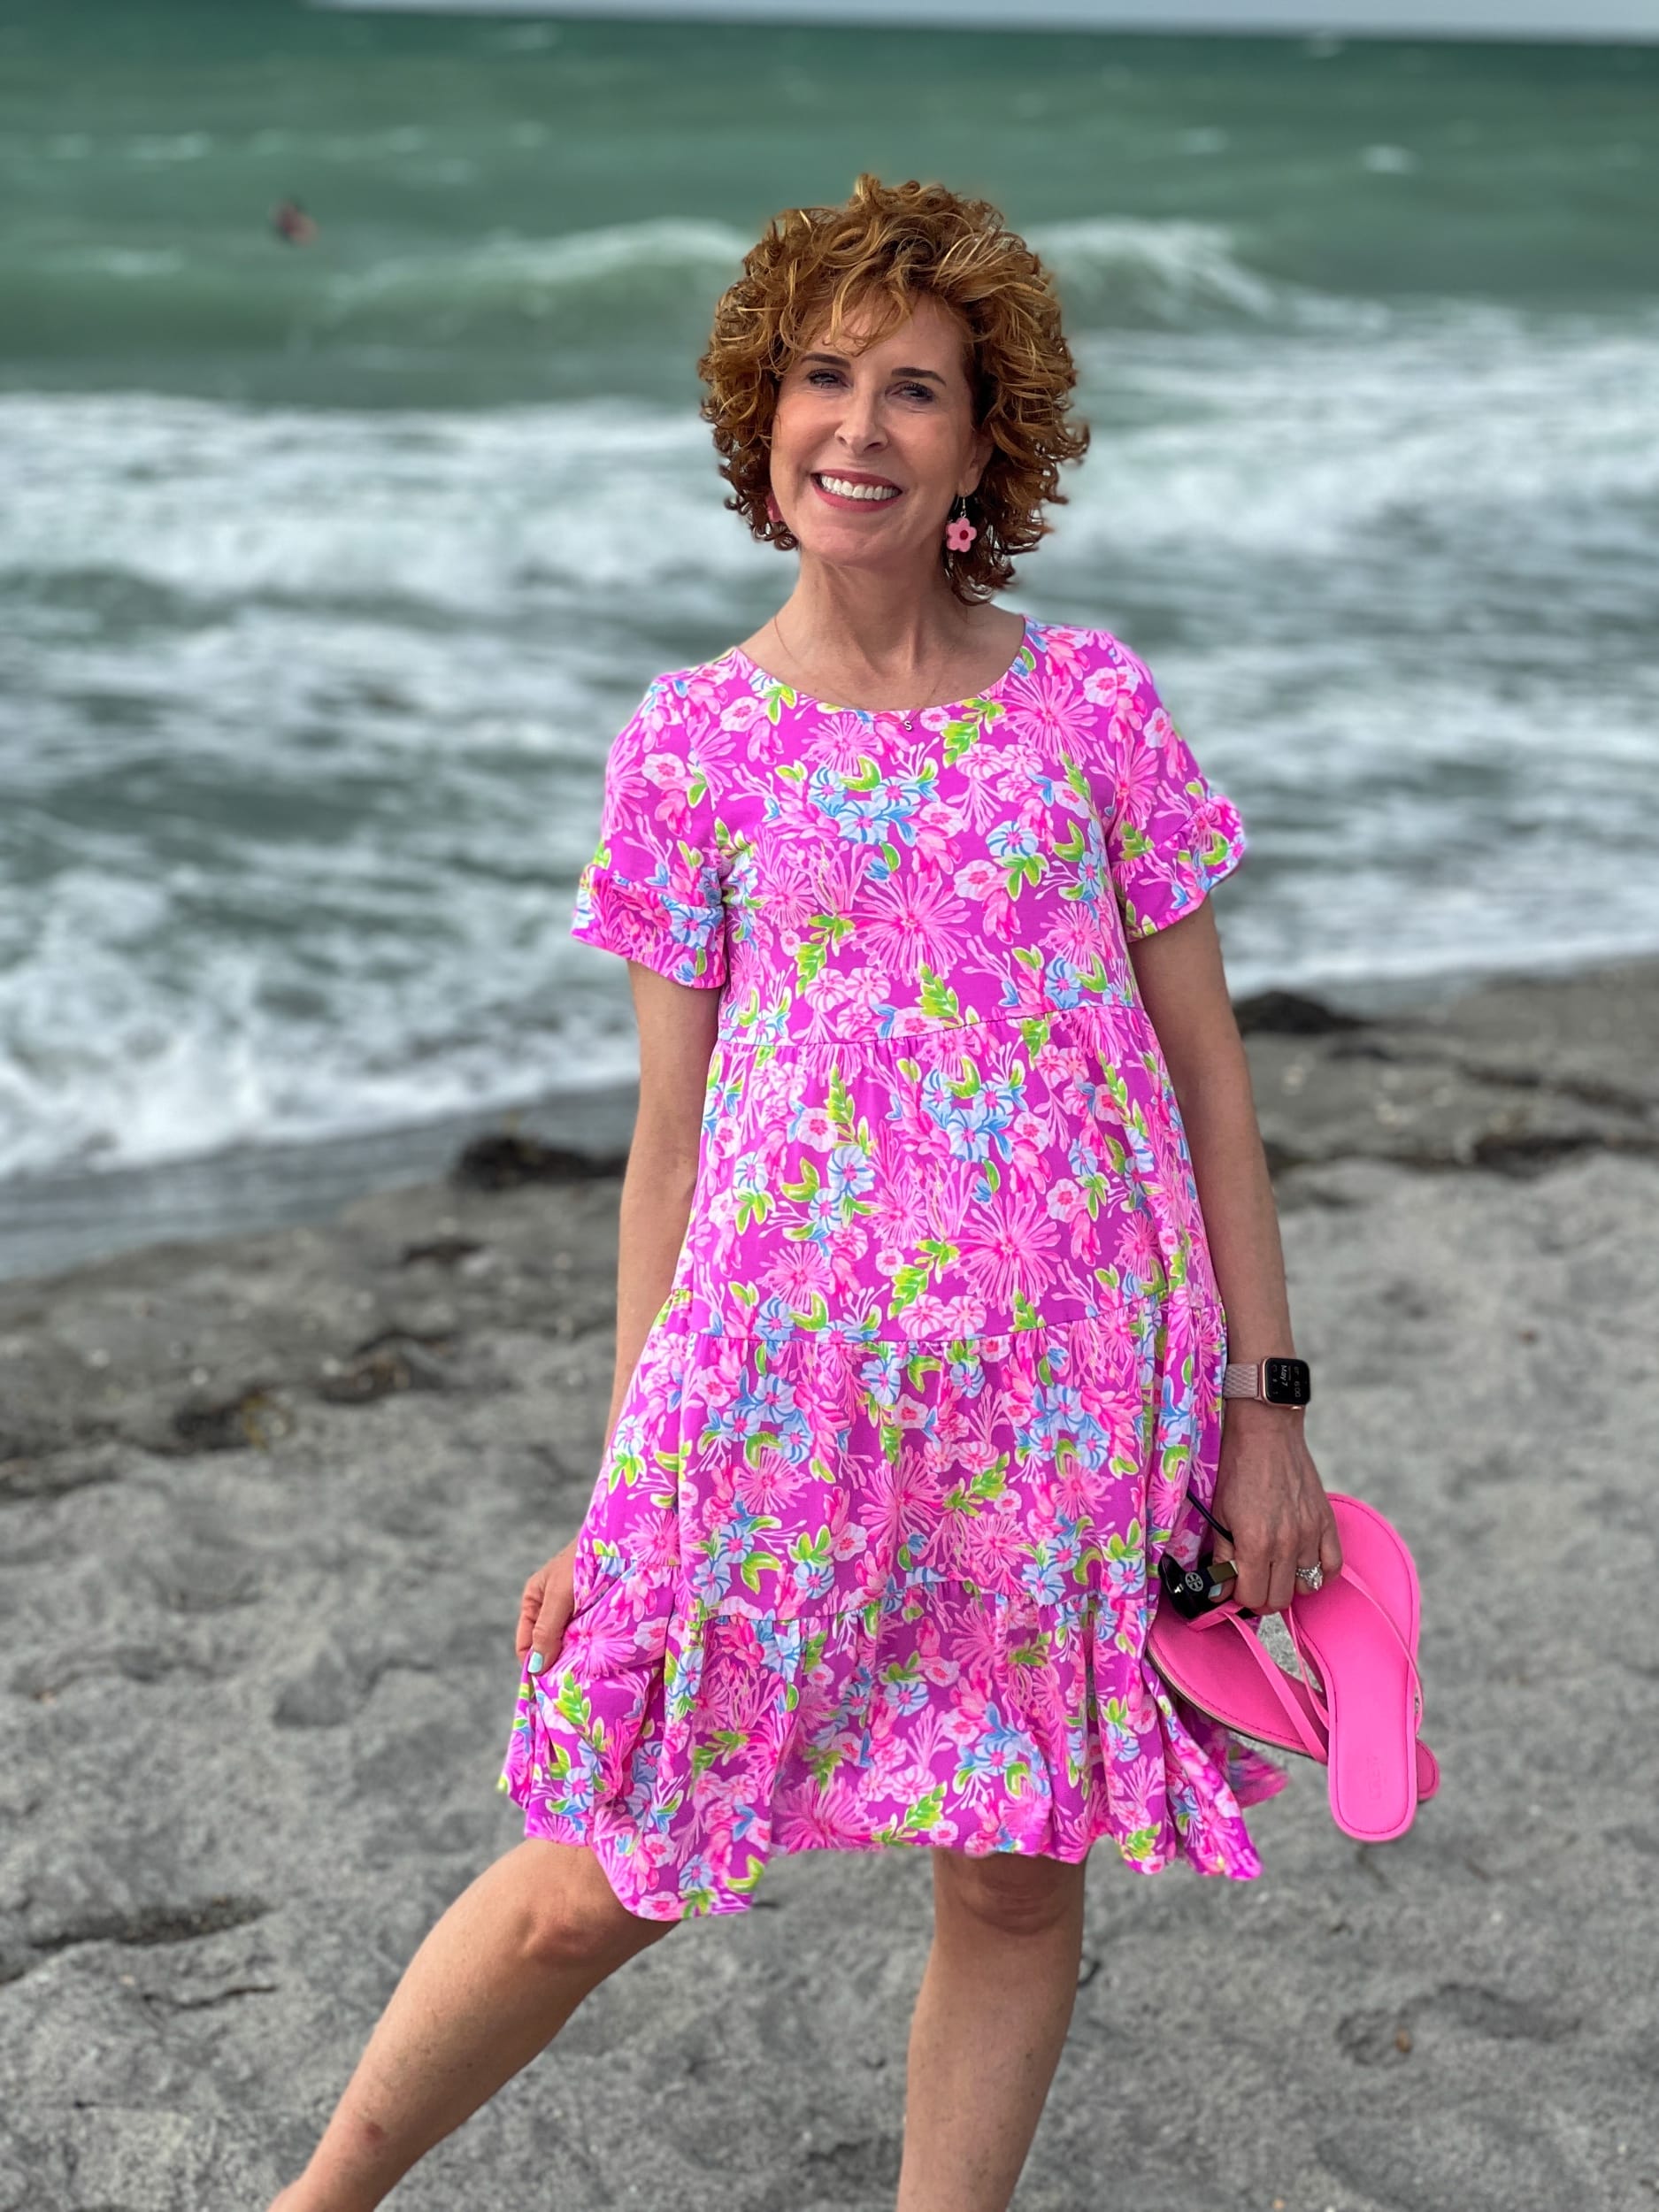 woman over 50 standing on the beach wearing a beach outfit